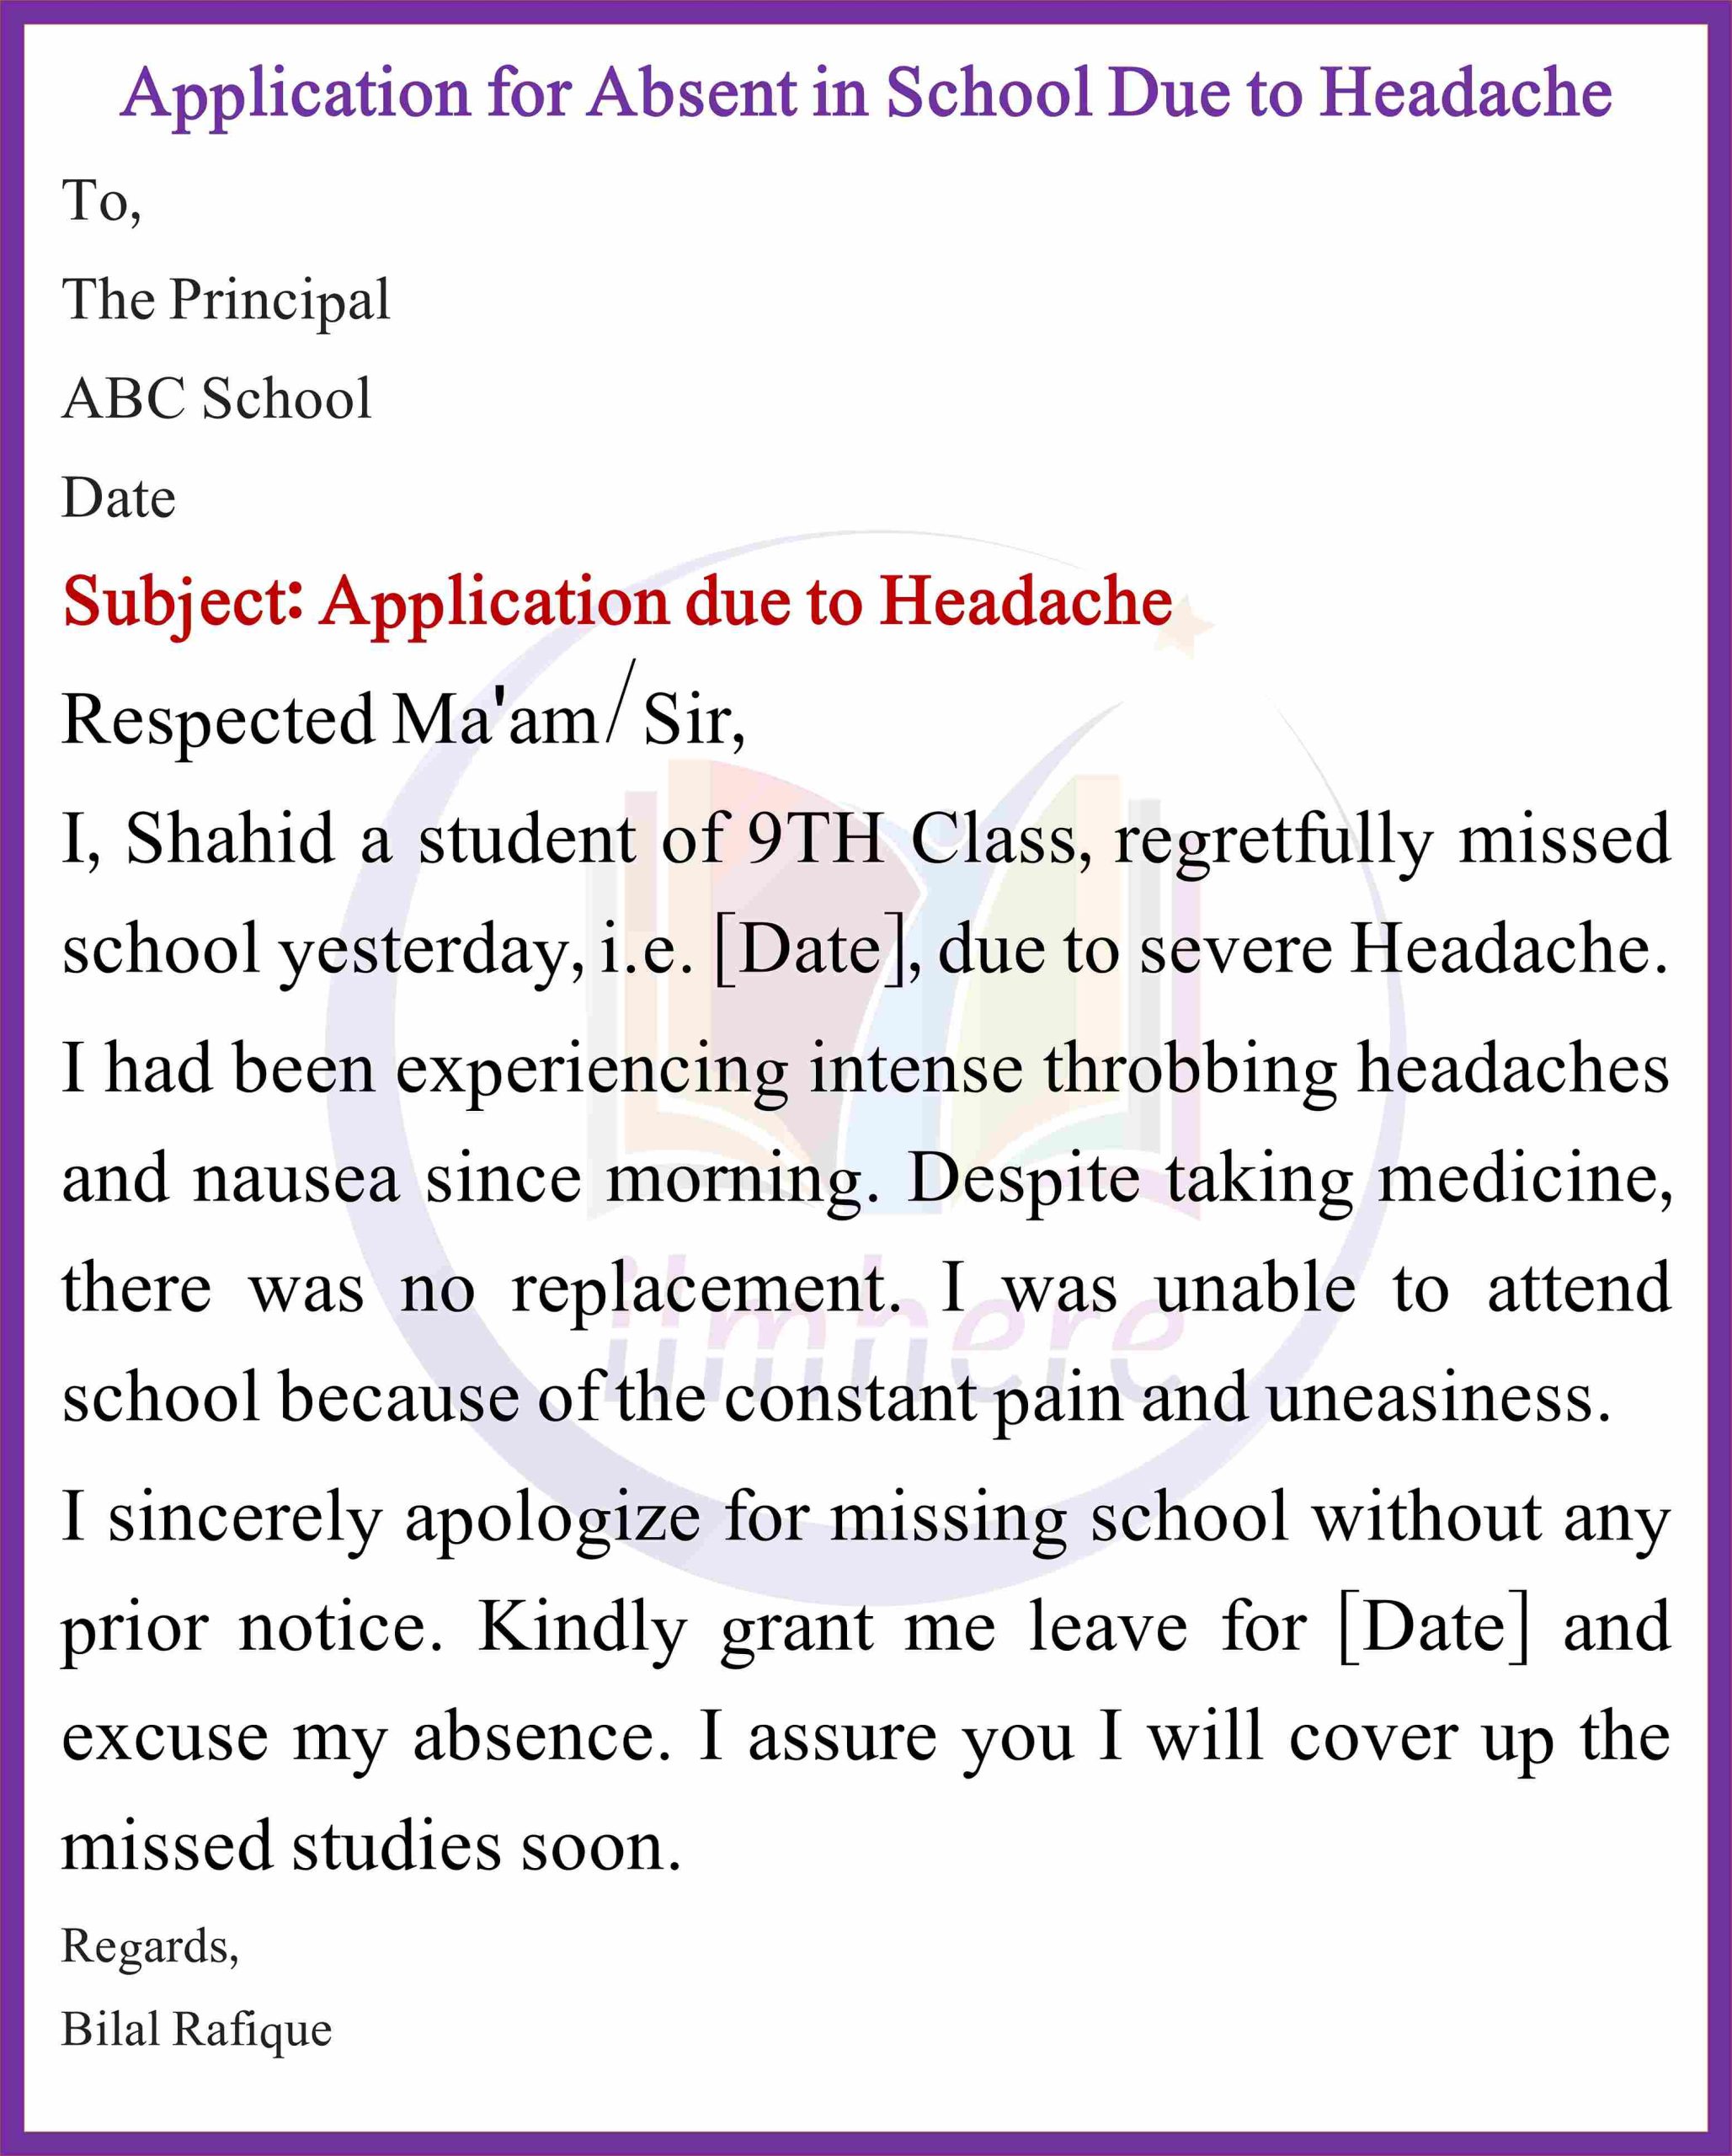 Application for Absent in School Due to Headache